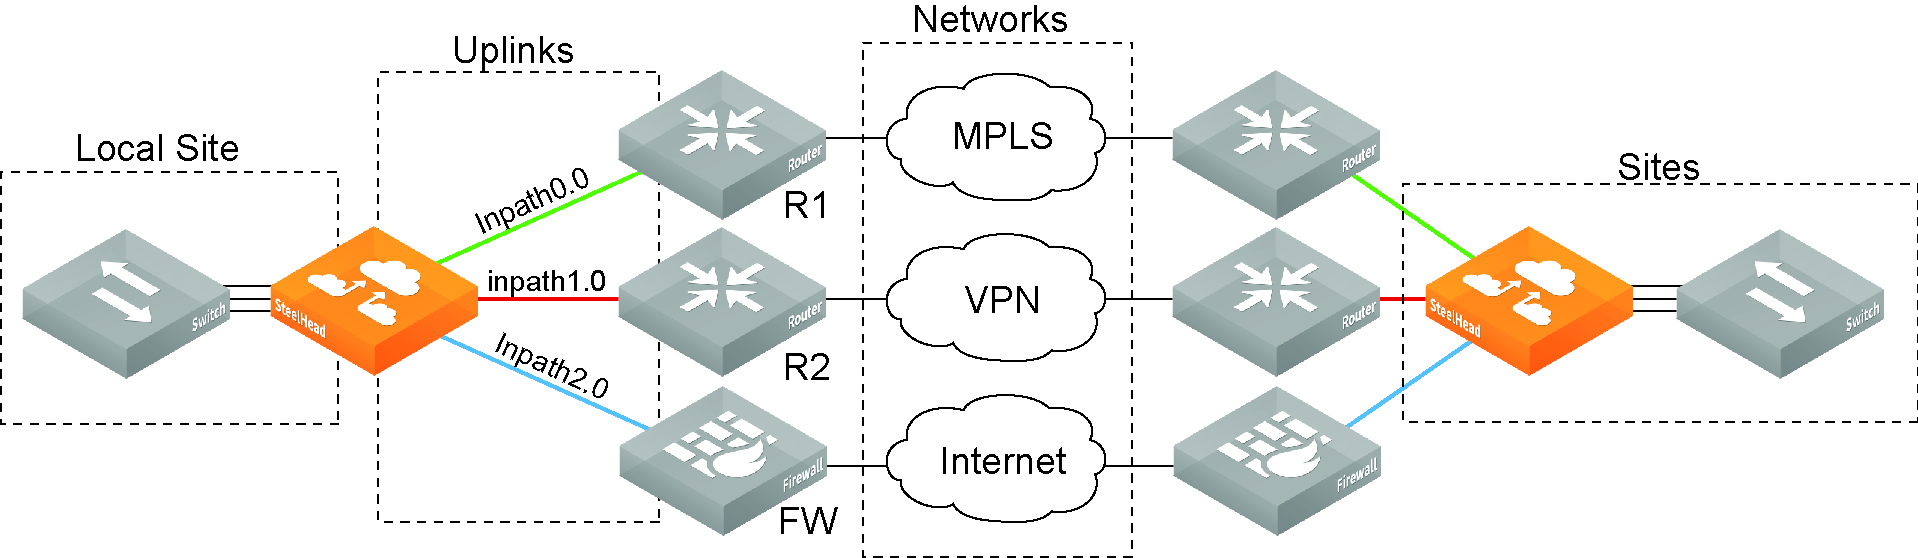 Network Engineering, Network Deployment and Network Operations &  Maintenance - VICTUS Networks